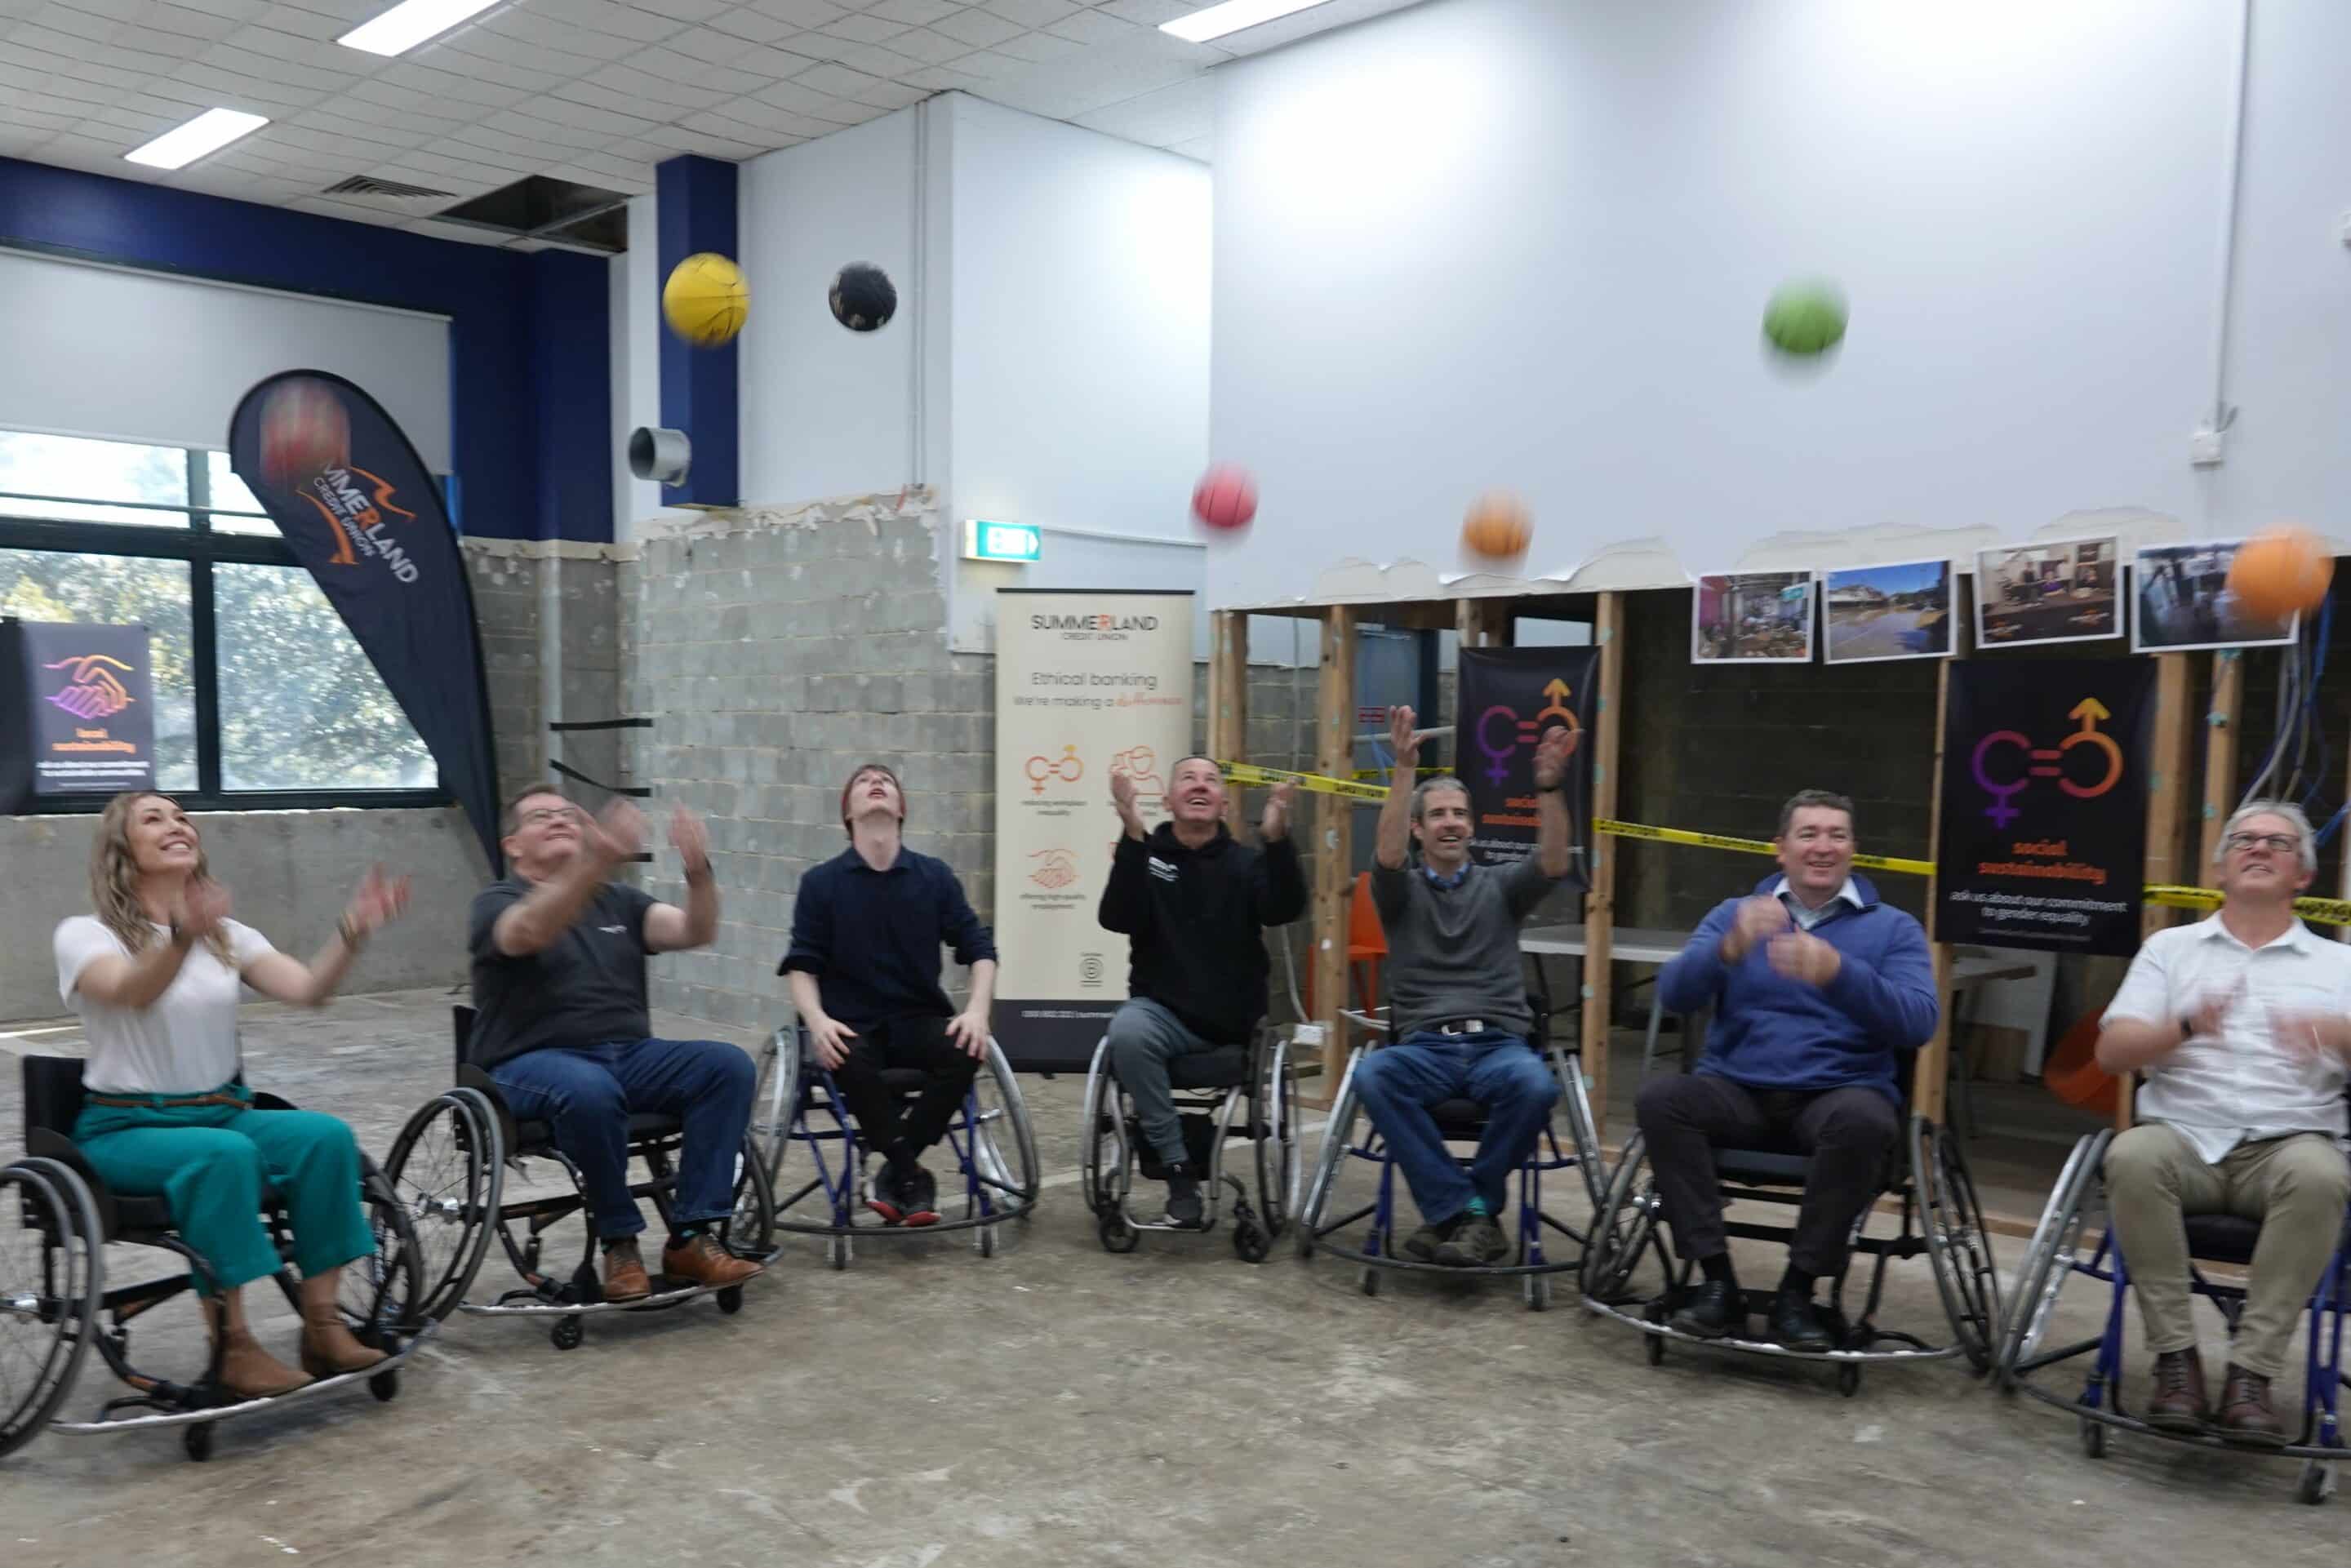 Social Futures wants to bring wheelchair sports to your workplace